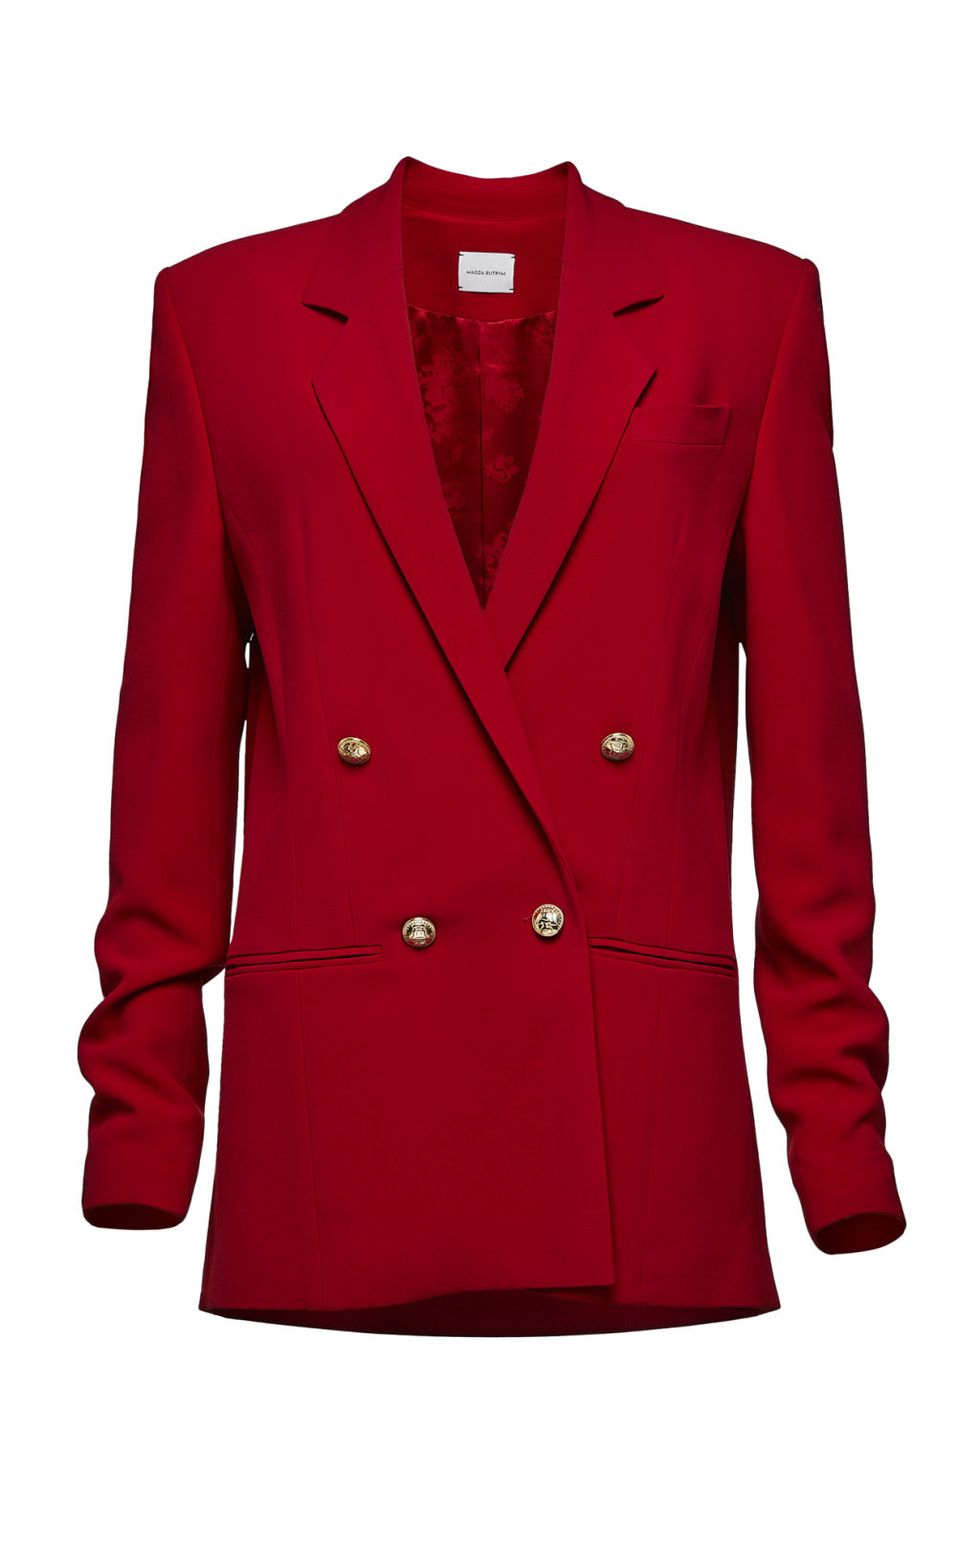 Clothing, Outerwear, Jacket, Blazer, Red, Sleeve, Suit, Formal wear, Button, Top, 